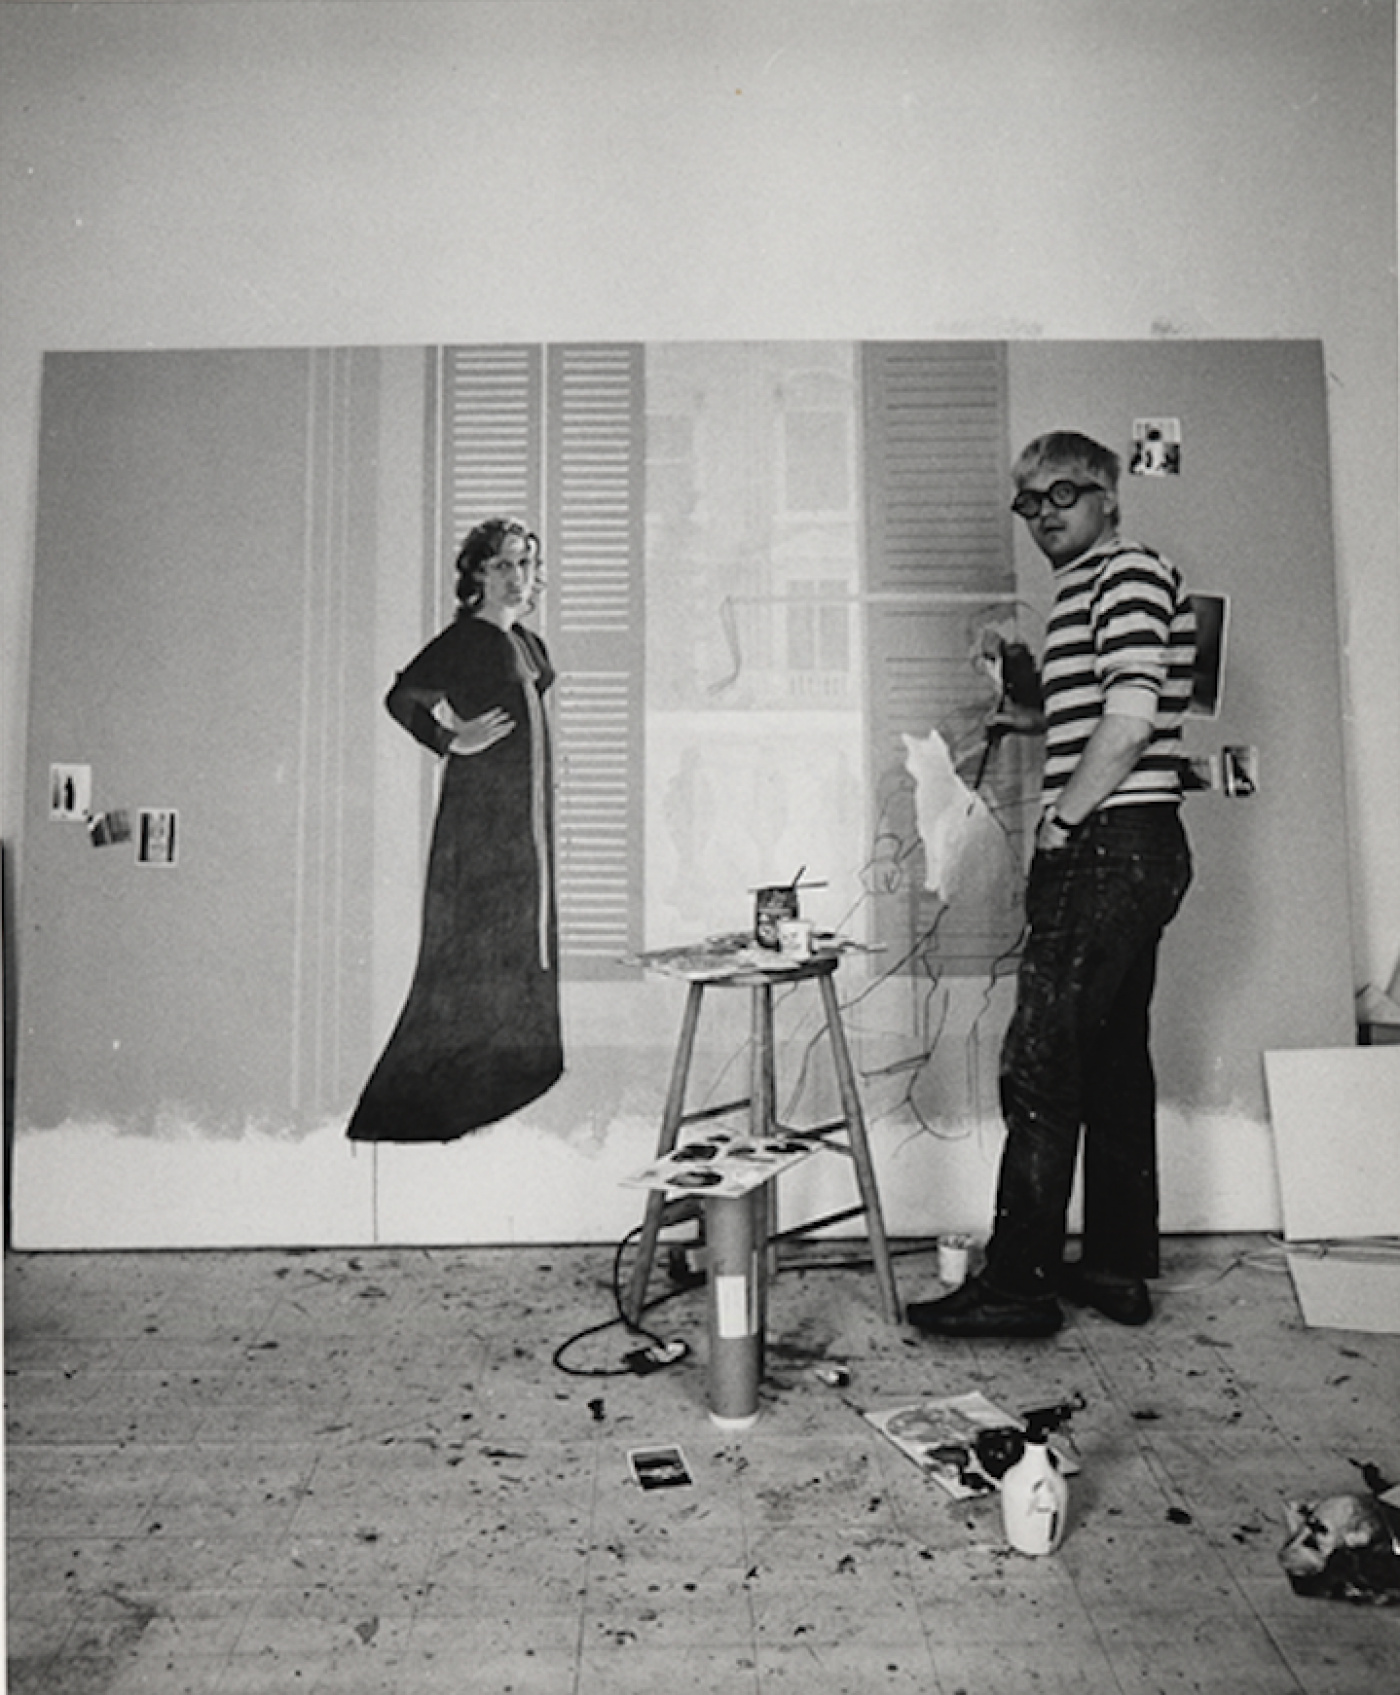 Mr & Mrs Clark, painting with Hockney in action